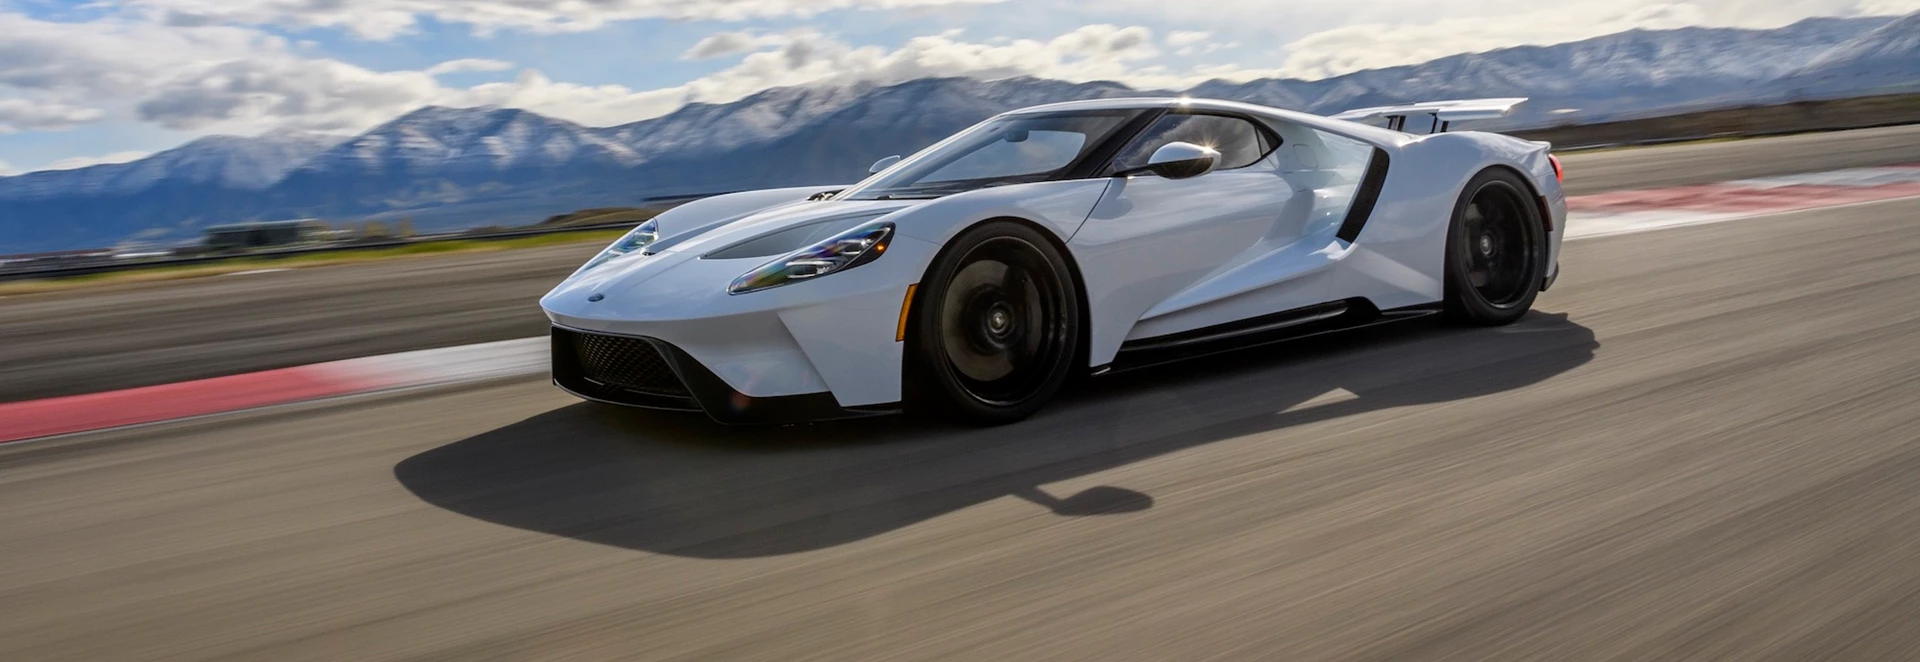 Ford extends production of GT supercar